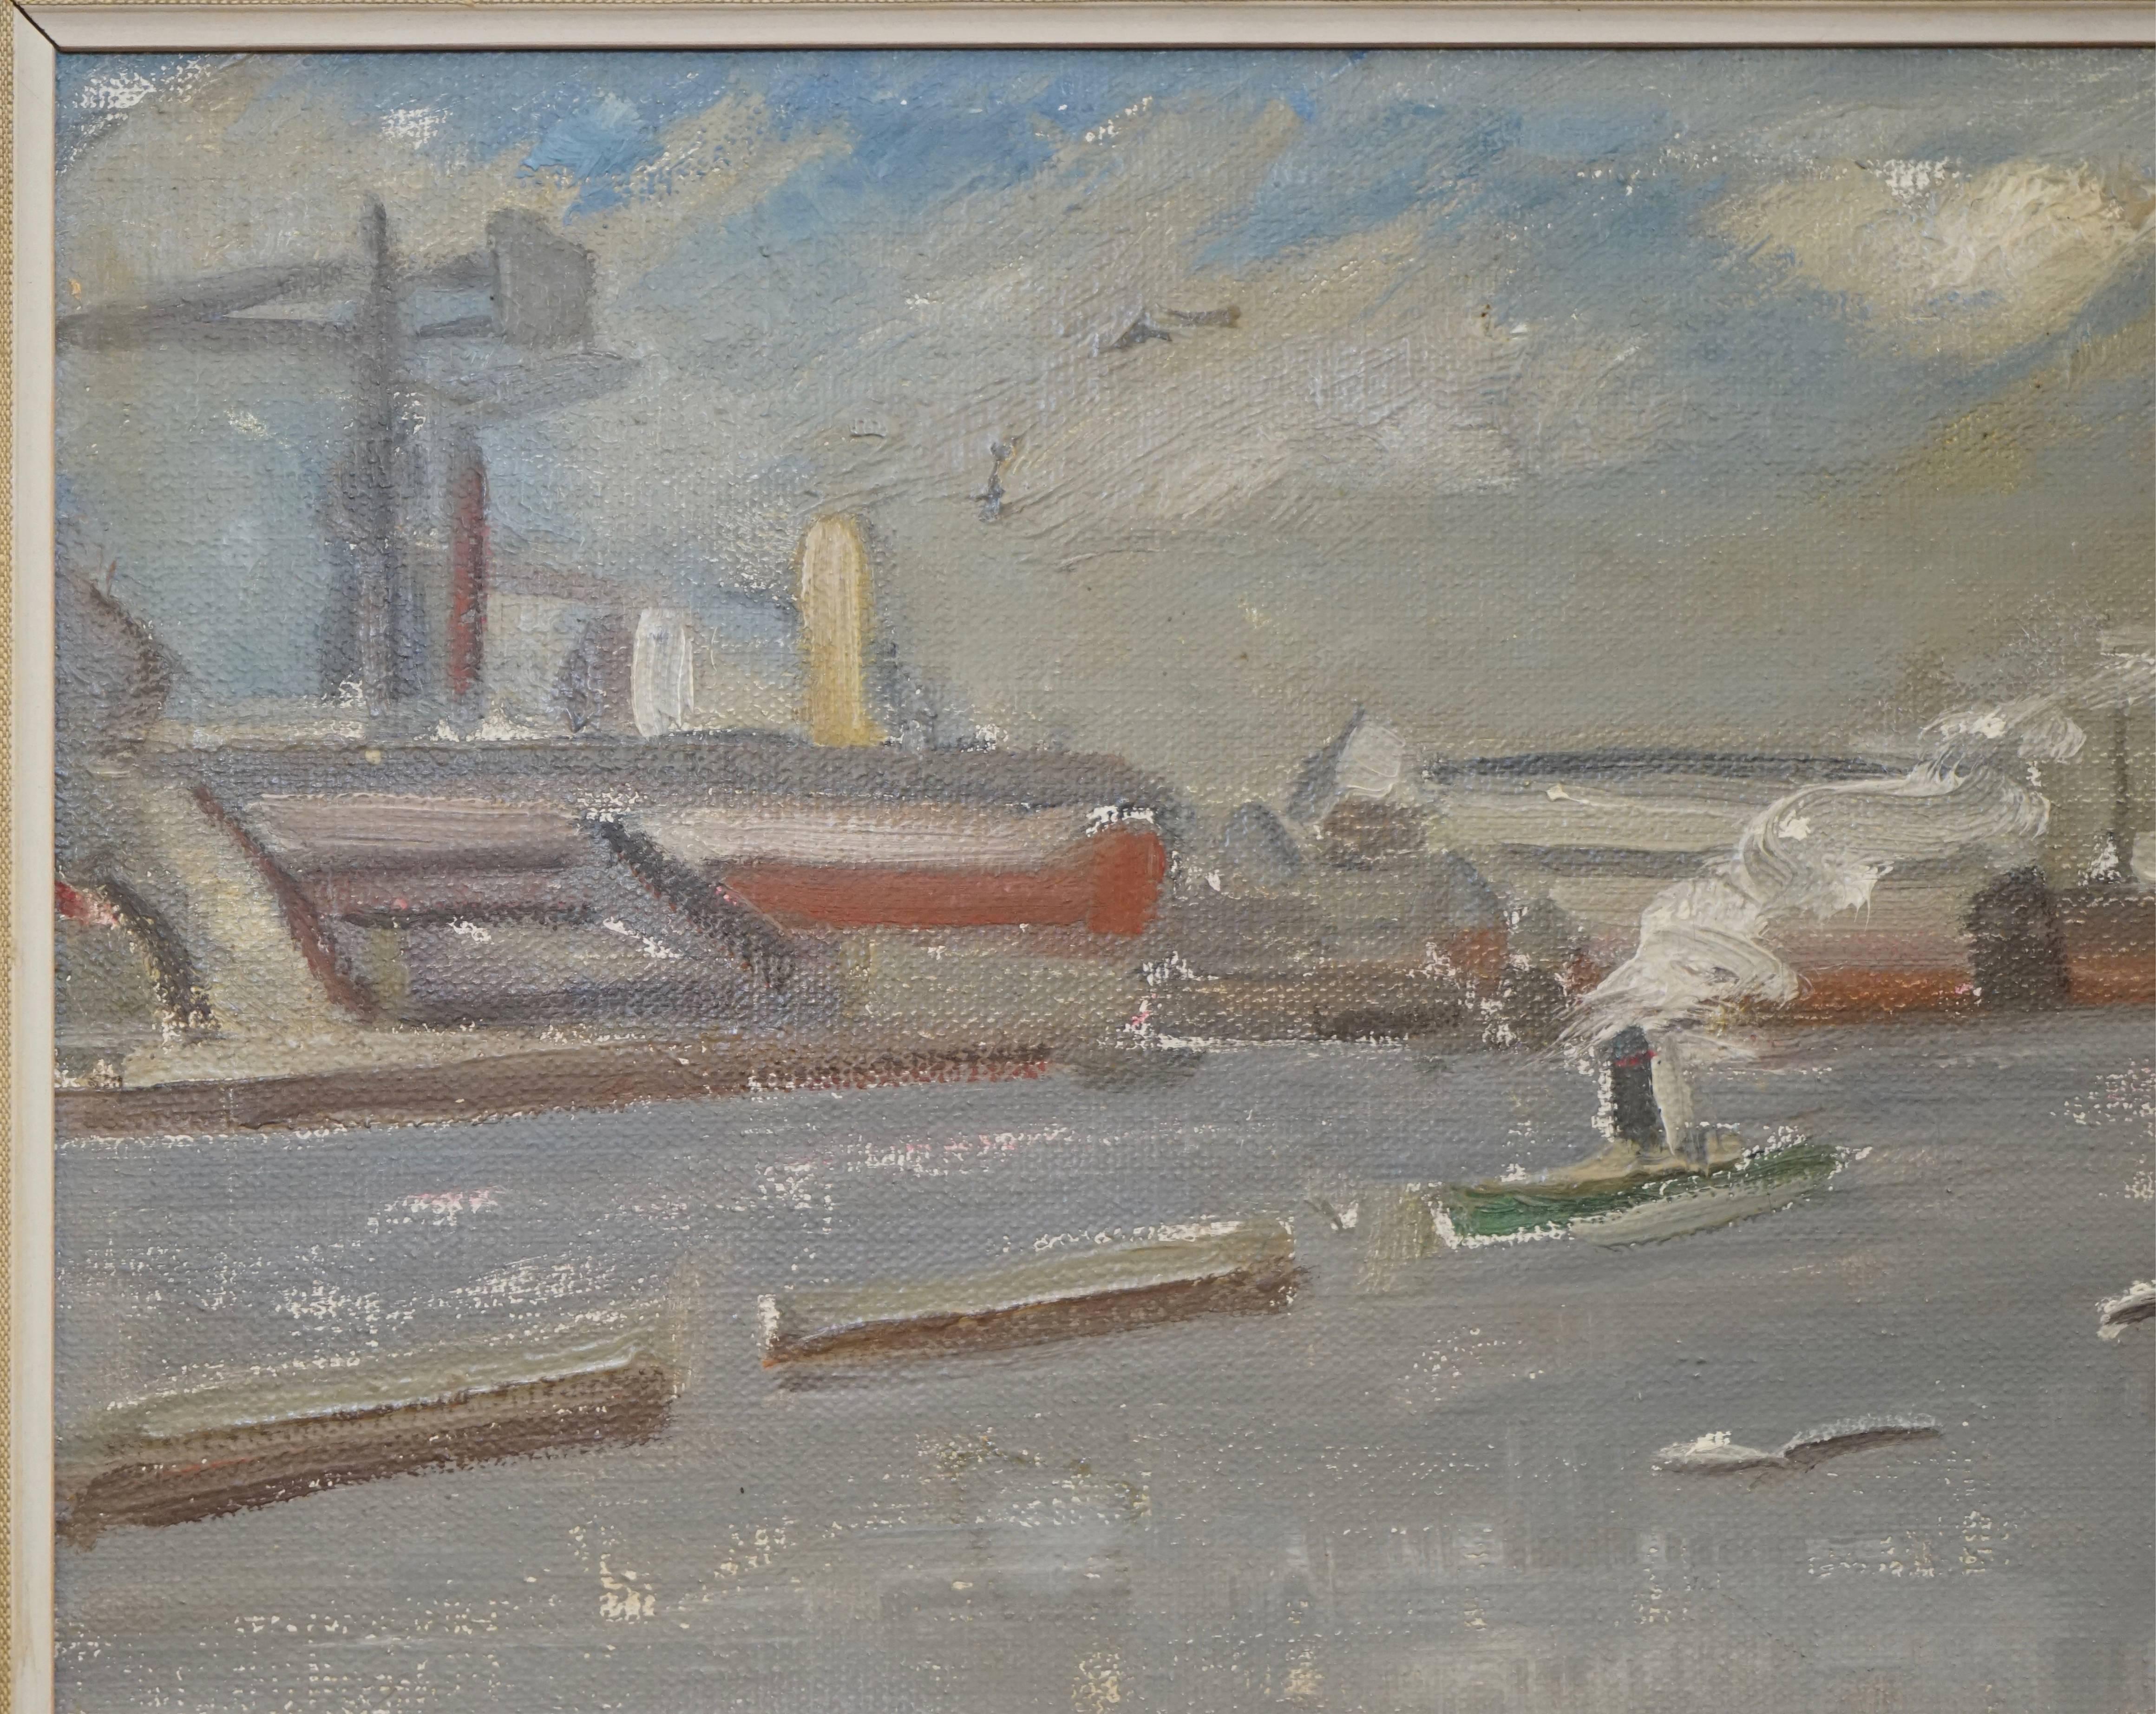 Göteborg, on Sweden's west coast, is a seafaring town, home to Volvo and SKF, is the powerhouse of Swedish industry. This oil painting on canvas, signed by Ivar Berg depicts Eriksberg shipyard in Göteborg's Industrial harbor.